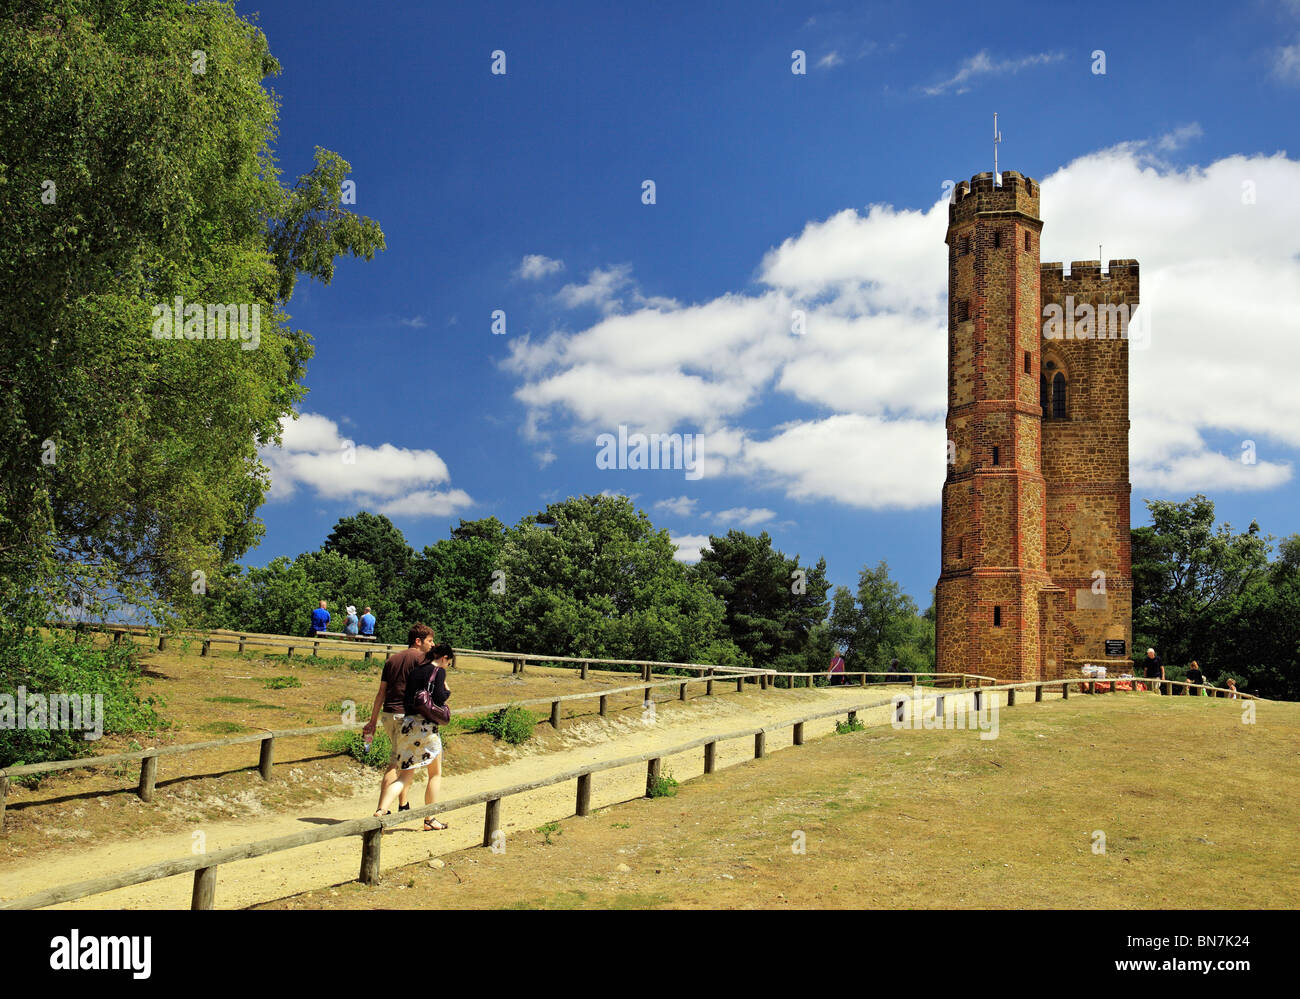 Leith Hill Tower. Stockfoto